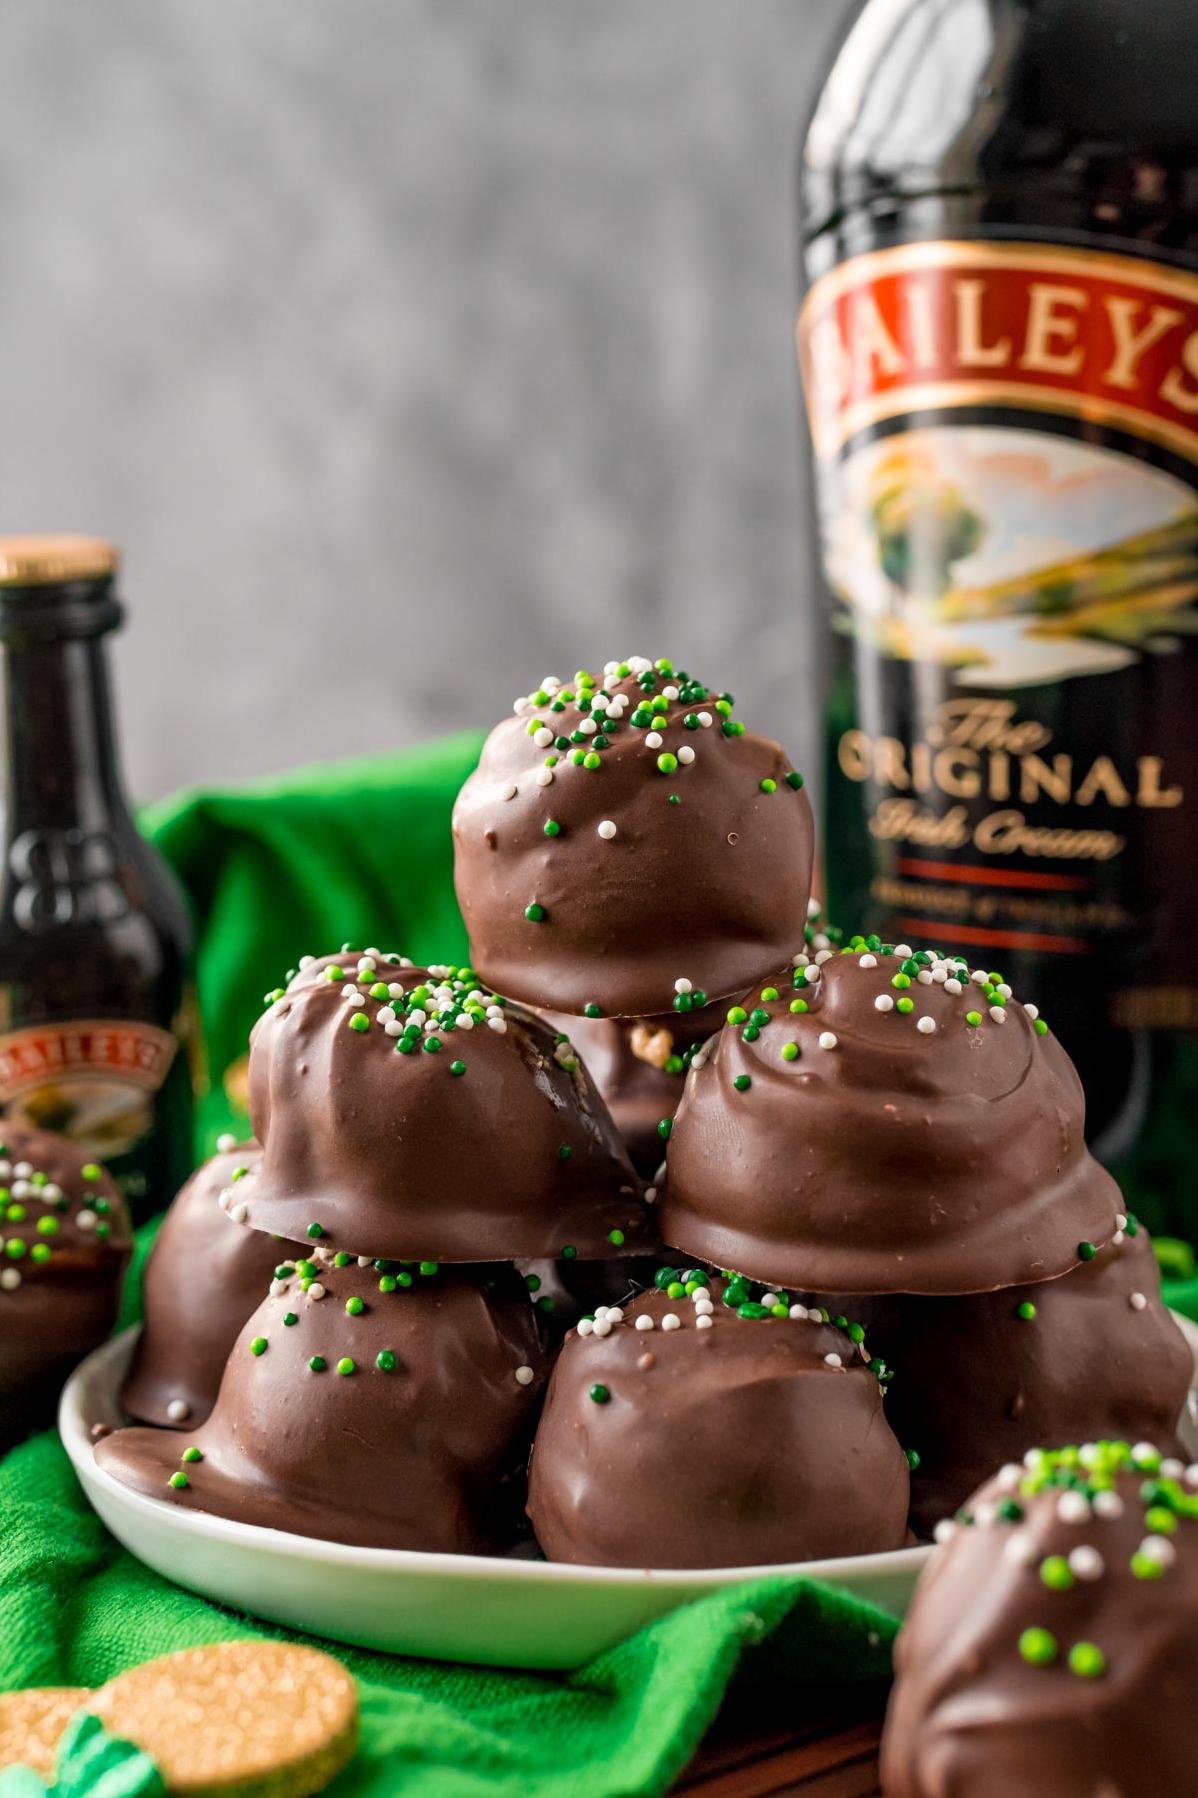  Impress your friends and family with these delicious and easy-to-make Irish Cream Balls.